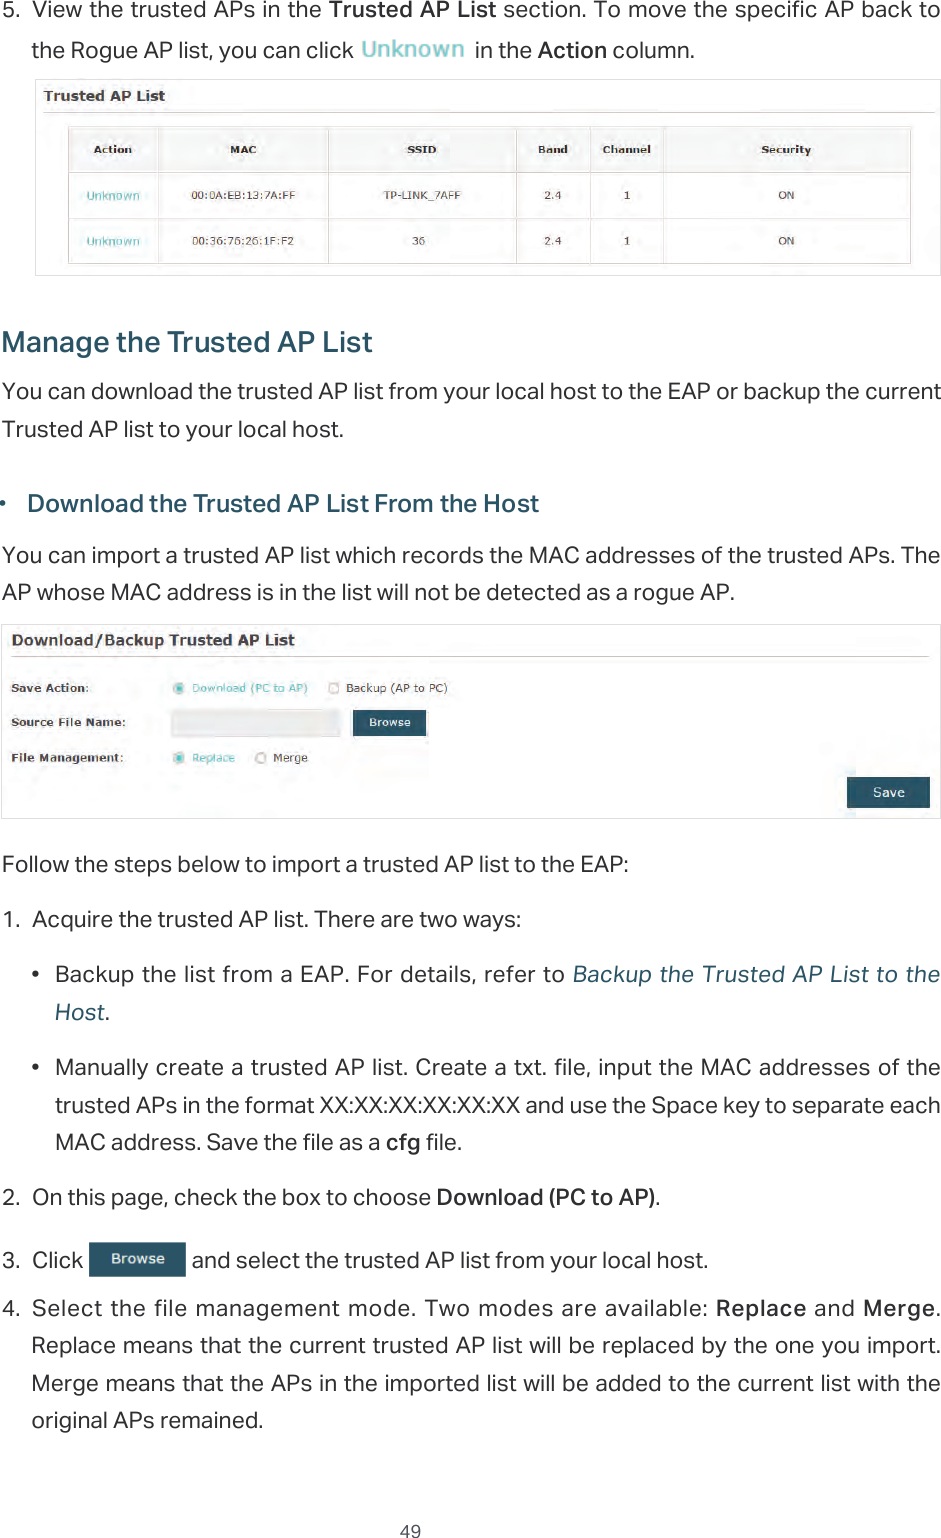  495. View the trusted APs in the Trusted AP List section. To move the specific AP back to the Rogue AP list, you can click   in the Action column.Manage the Trusted AP ListYou can download the trusted AP list from your local host to the EAP or backup the current Trusted AP list to your local host. ·Download the Trusted AP List From the HostYou can import a trusted AP list which records the MAC addresses of the trusted APs. The AP whose MAC address is in the list will not be detected as a rogue AP.Follow the steps below to import a trusted AP list to the EAP:1. Acquire the trusted AP list. There are two ways:•  Backup the list from a EAP. For details, refer to Backup the Trusted AP List to the Host.•  Manually create a trusted AP list. Create a txt. file, input the MAC addresses of the trusted APs in the format XX:XX:XX:XX:XX:XX and use the Space key to separate each MAC address. Save the file as a cfg file.2. On this page, check the box to choose Download (PC to AP).3. Click   and select the trusted AP list from your local host.4. Select the file management mode. Two modes are available: Replace and Merge. Replace means that the current trusted AP list will be replaced by the one you import. Merge means that the APs in the imported list will be added to the current list with the original APs remained.